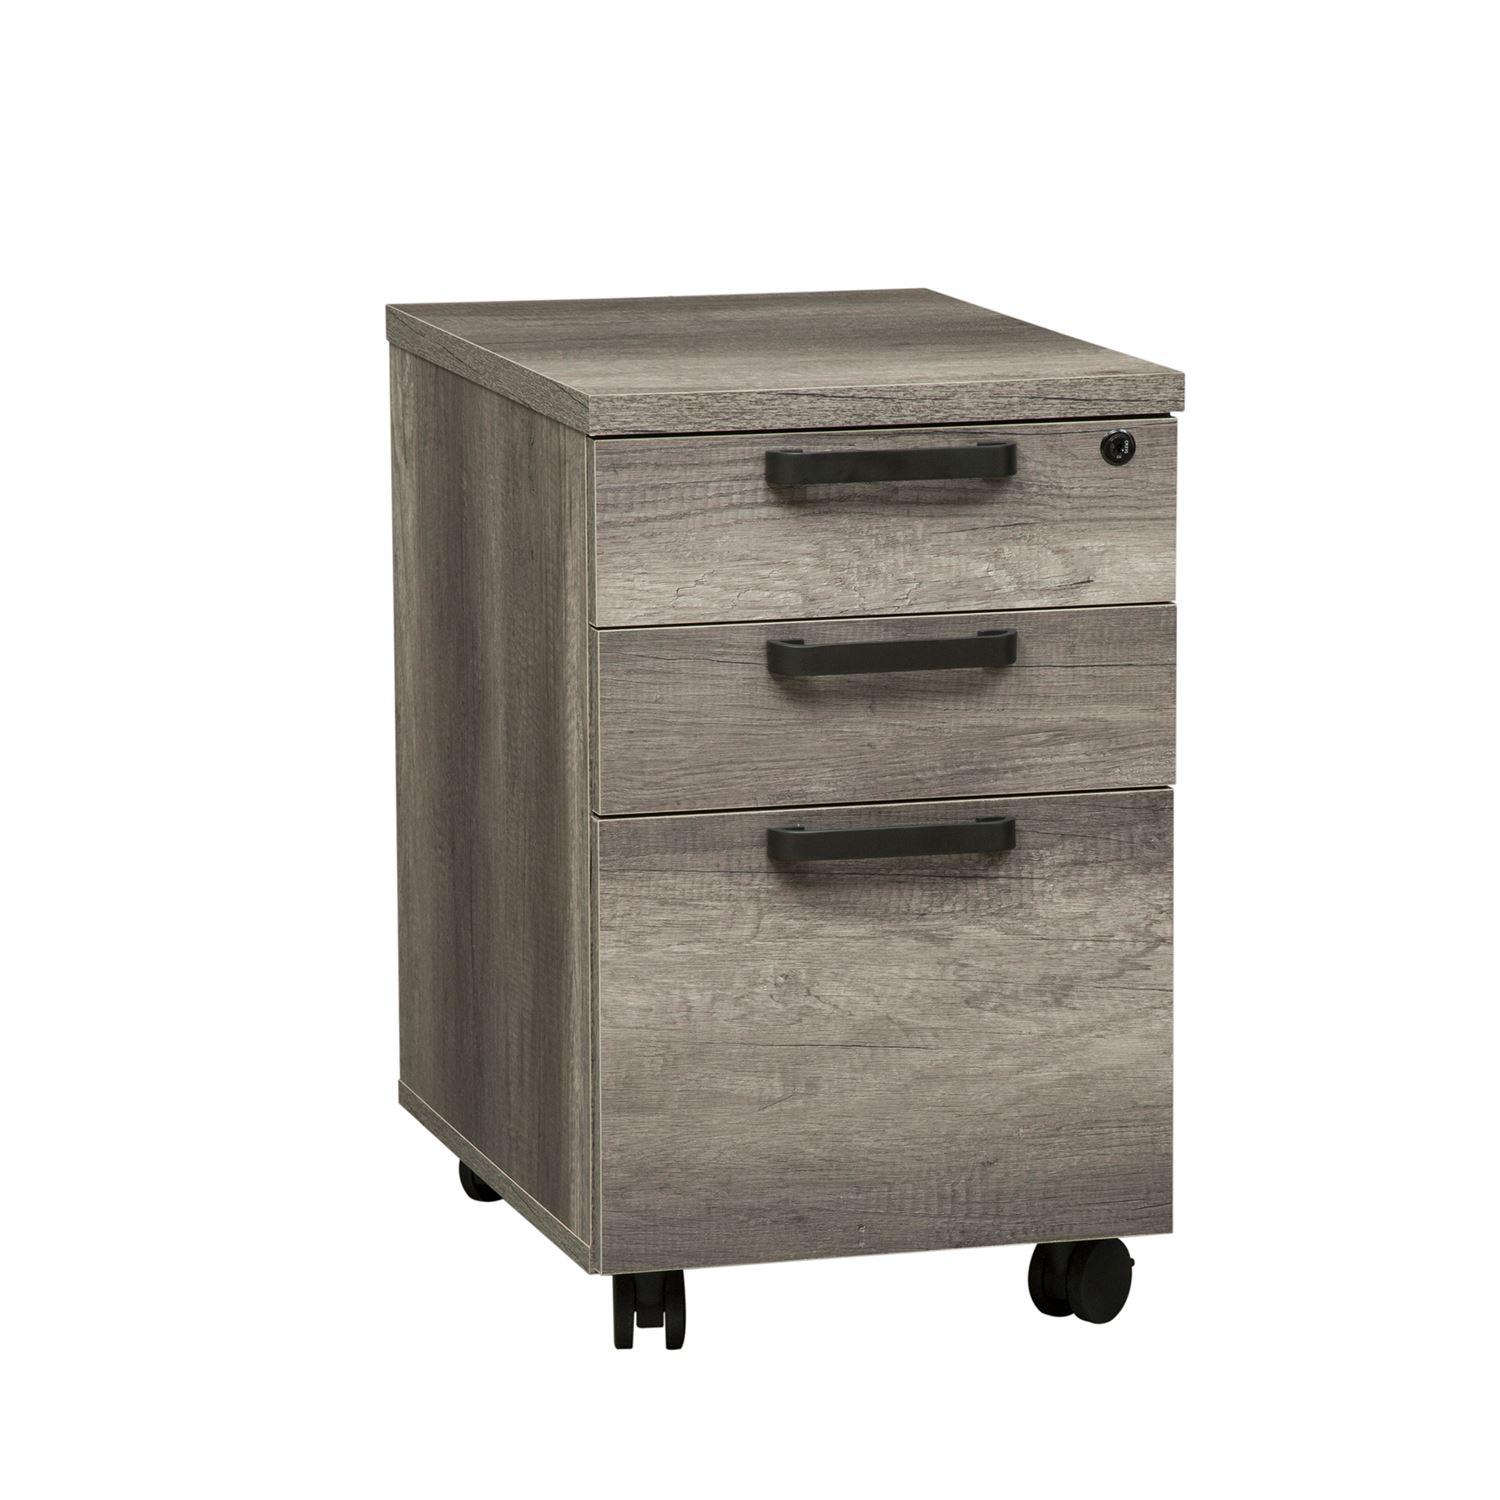   Tanners Creek  (686-HO) Filling Cabinet  